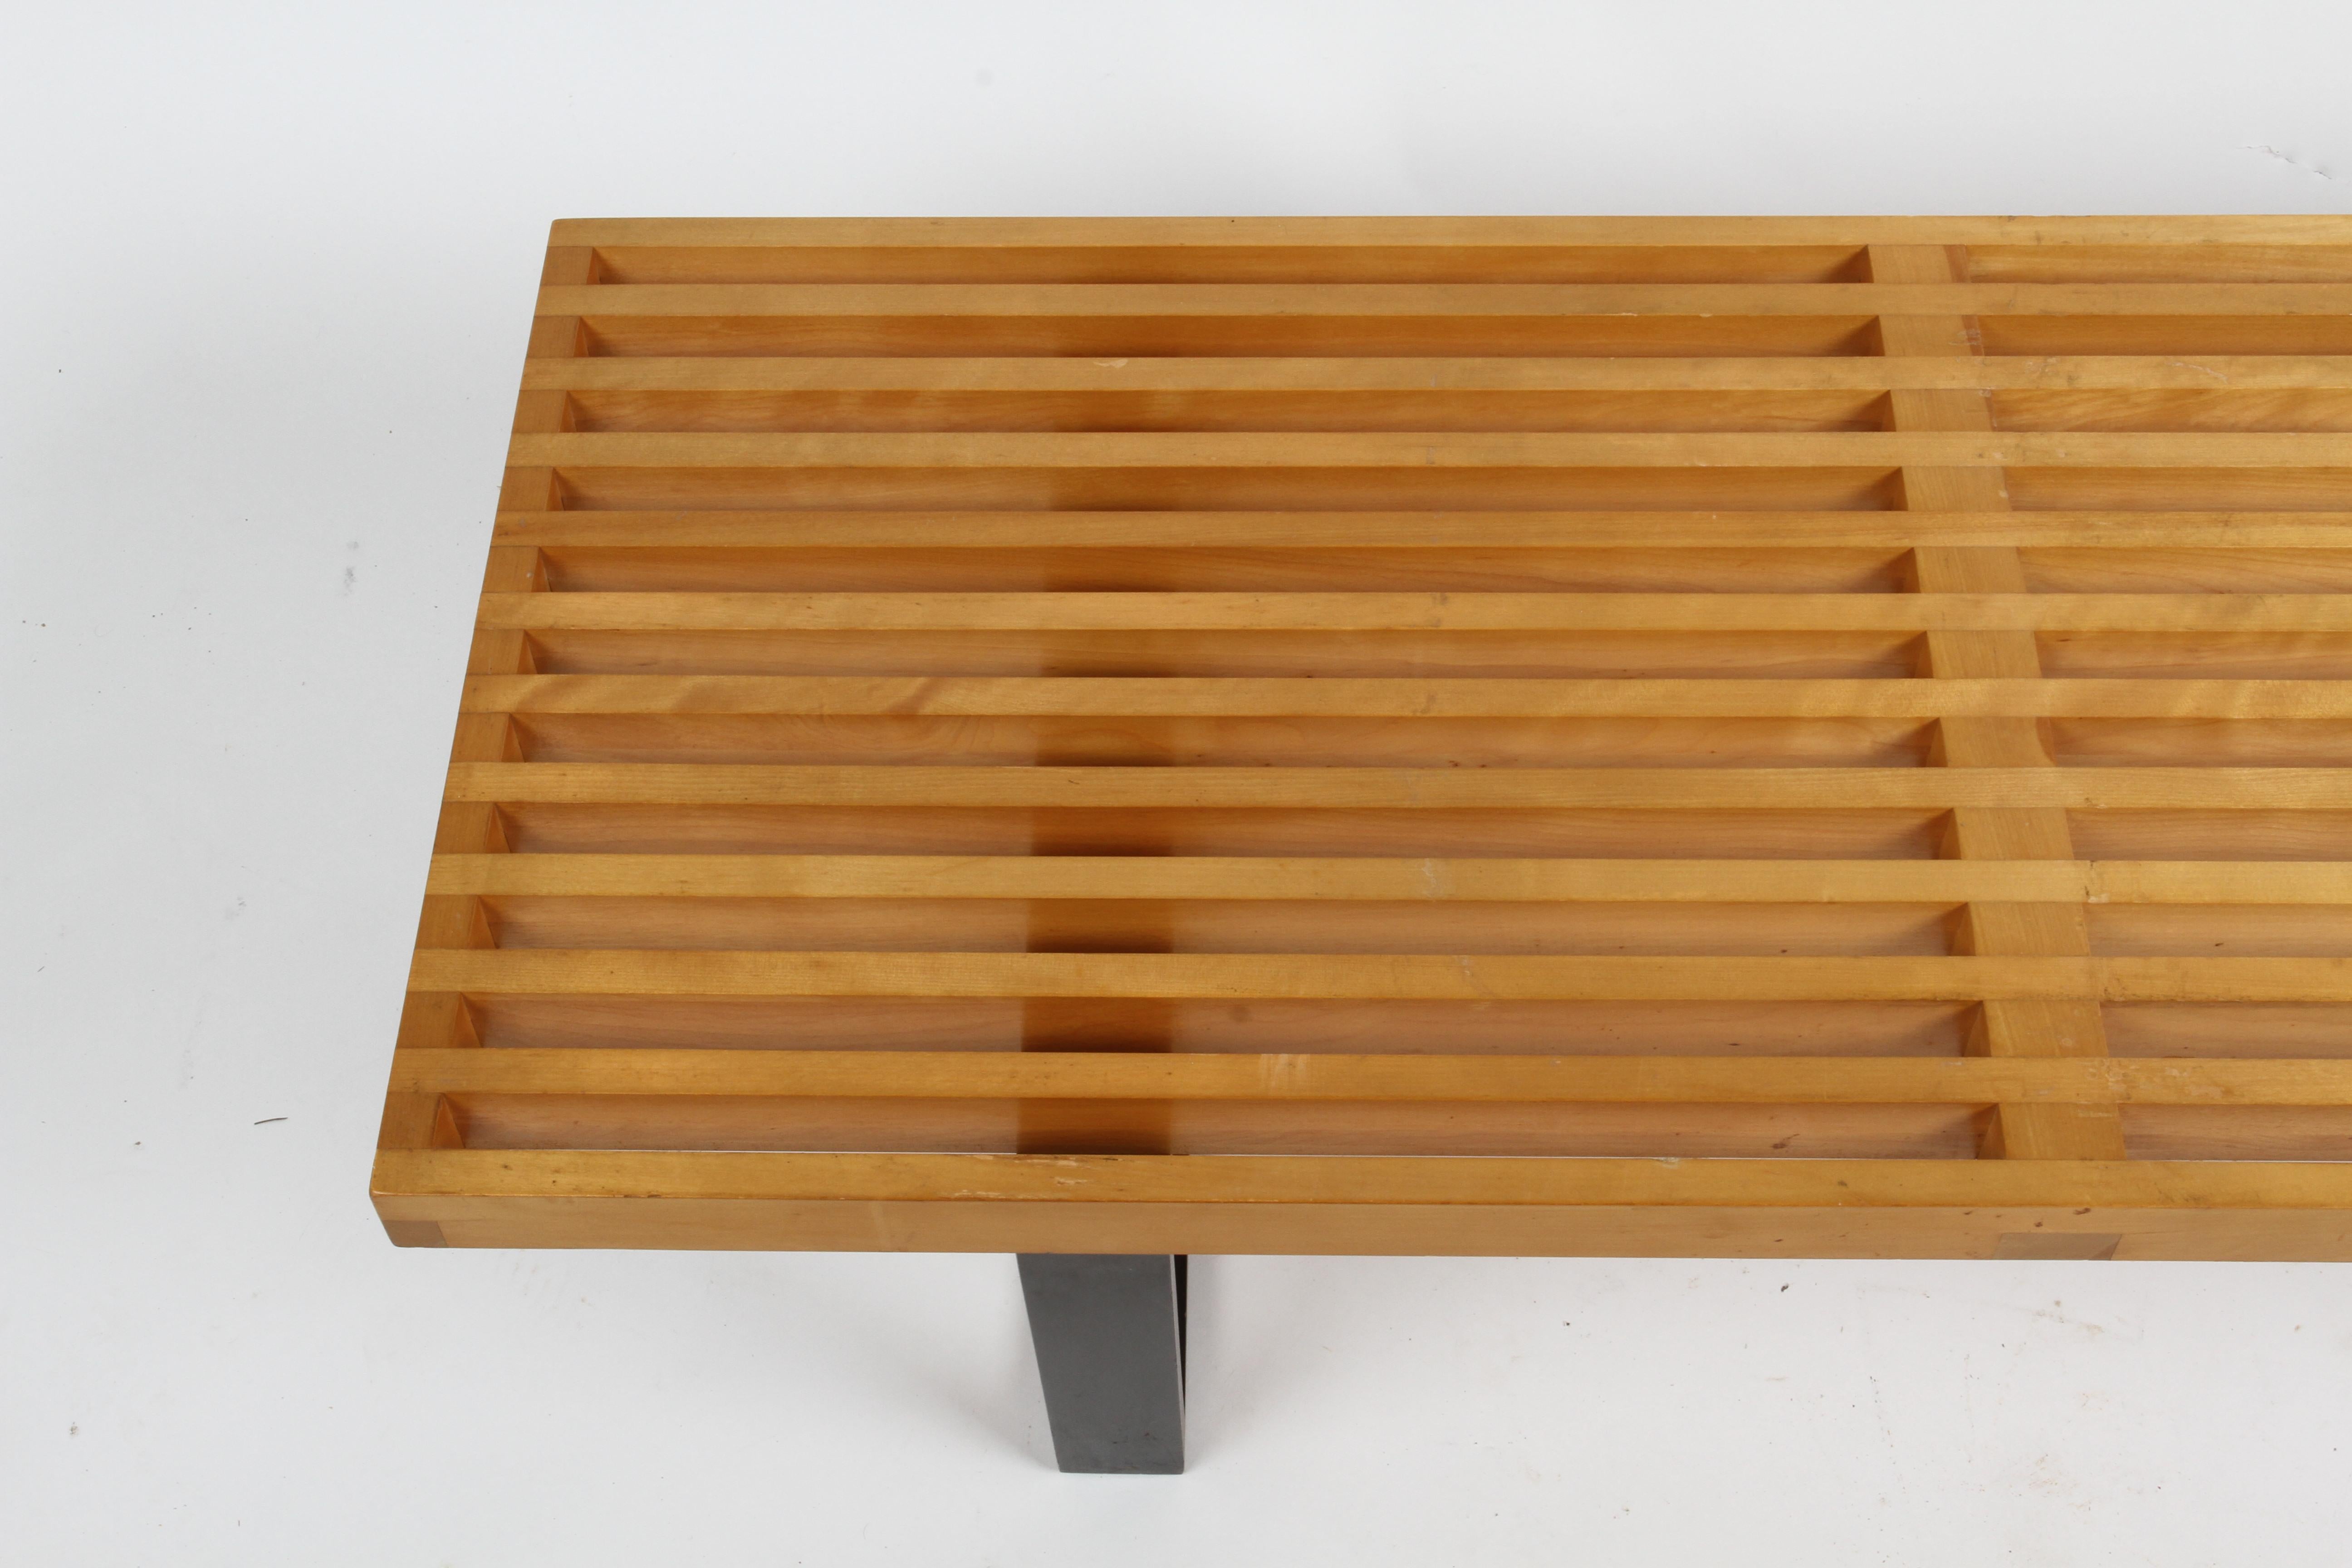 Mid-Century Modern Iconic George Nelson #4691 Vintage Slat Bench for Herman Miller Uncommon 68